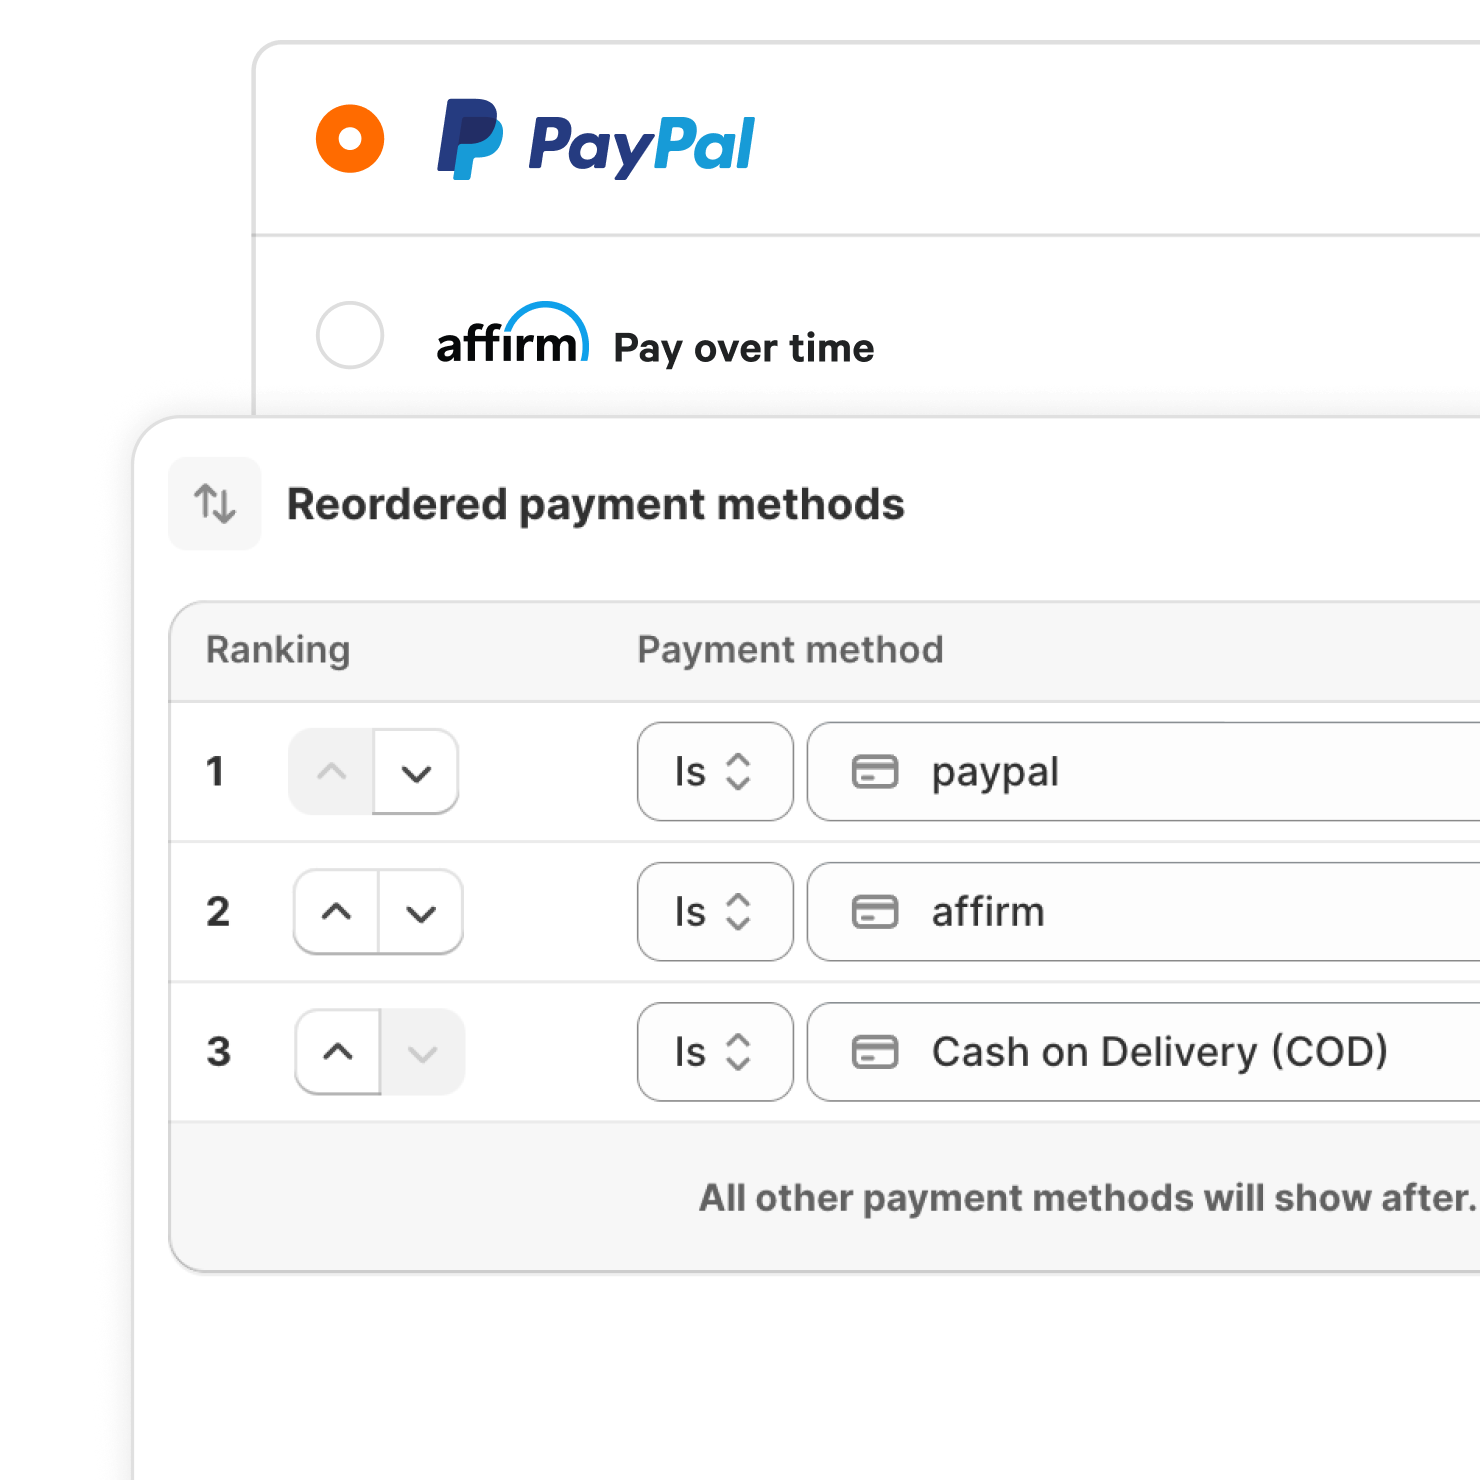 Reorder payment methods image